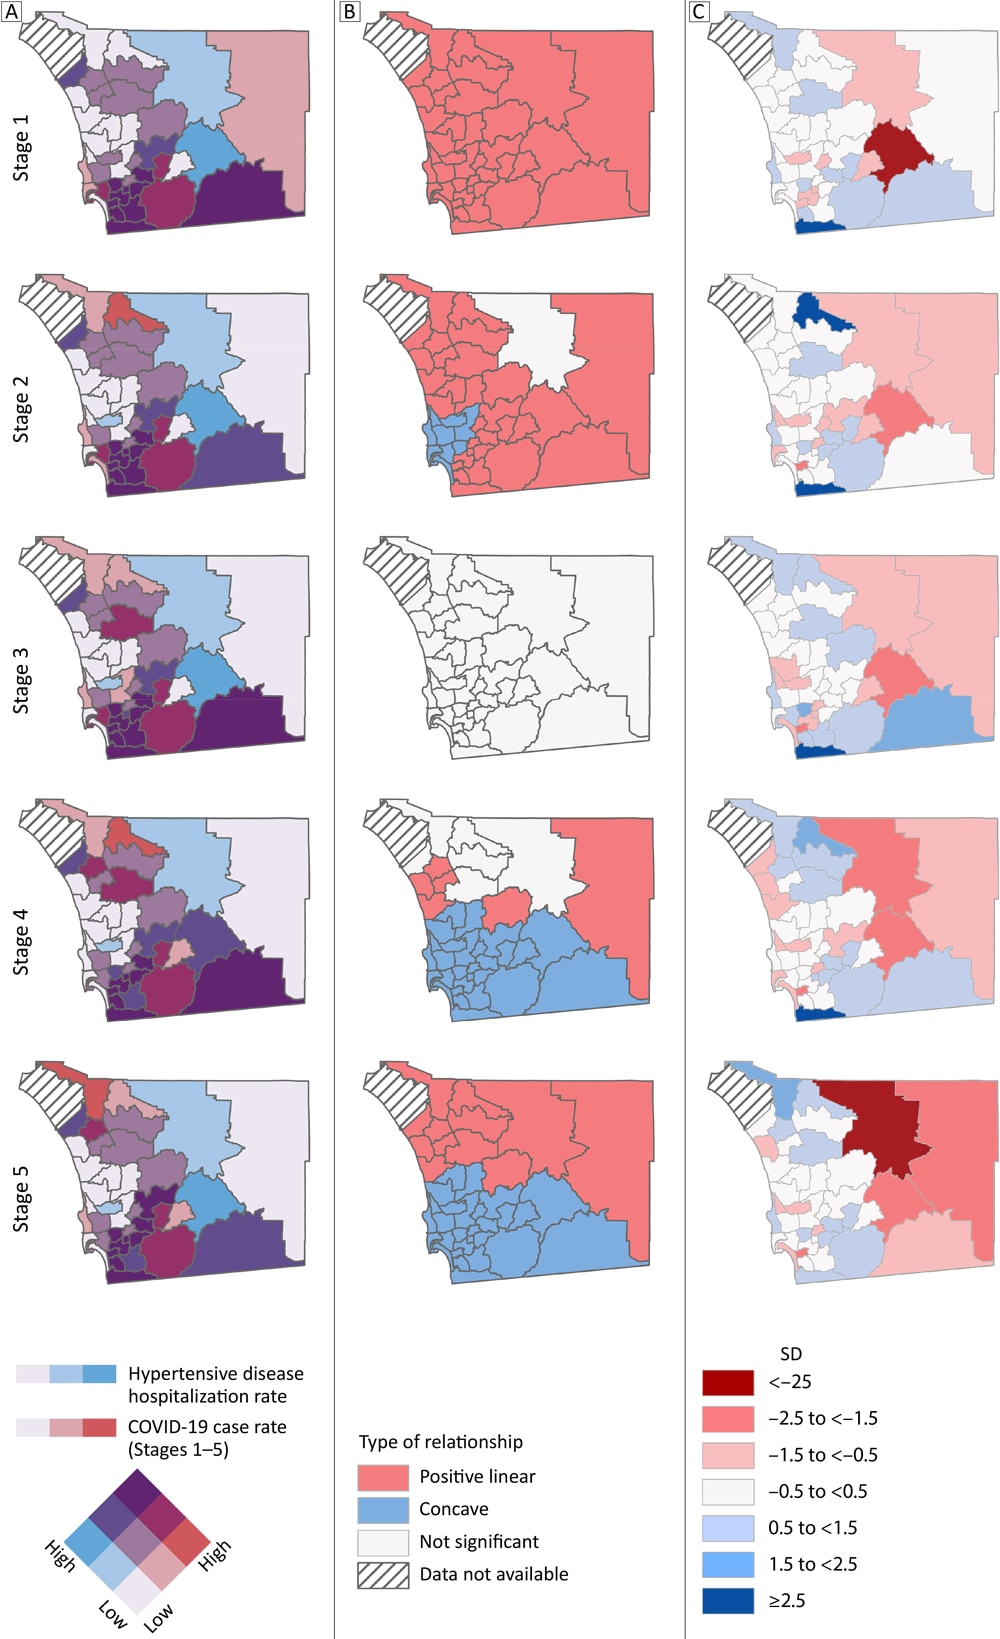 Bivariate visualizations of the age-adjusted hospitalization rate (independent) for hypertensive disease (hypertension, hypertensive heart disease, hypertensive chronic kidney disease, and hypertensive encephalopathy) and the daily average stage case rates (dependent) for COVID-19 in San Diego County subregional areas. Stages were determined by 7-day average case trends: Stage 1: March 31, 2020, to June 24, 2020; Stage 2: June 25, 2020, to August 18, 2020; Stage 3: August 19, 2020, to October 31, 2020; Stage 4: November 1, 2020, to January 23, 2021; and Stage 5: January 24, 2021, to April 3, 2021. Hospitalization rates for hypertensive disease (hypertension, hypertensive heart disease, hypertensive chronic kidney disease, and hypertensive encephalopathy) are for 2017 and consider the annual, age-adjusted rate per 100,000 residents. COVID-19 case rates consider the average daily rates per 100,000 residents for the stage. A. Layered quantile classification method for hypertensive disease hospitalization rates and the COVID-19 case rates. B. Type of local bivariate relationship for hypertensive disease hospitalization rates and COVID-19 case rates (rates not calculated for fewer than 5 events). C. Geographically weighted regression standardized residuals (prediction errors) as SDs for hypertensive disease hospitalization rates and COVID-19 case rates. Negative SD values indicate overpredicted COVID-19 case rates whereas positive SD values indicate underpredicted COVID-19 case rates.